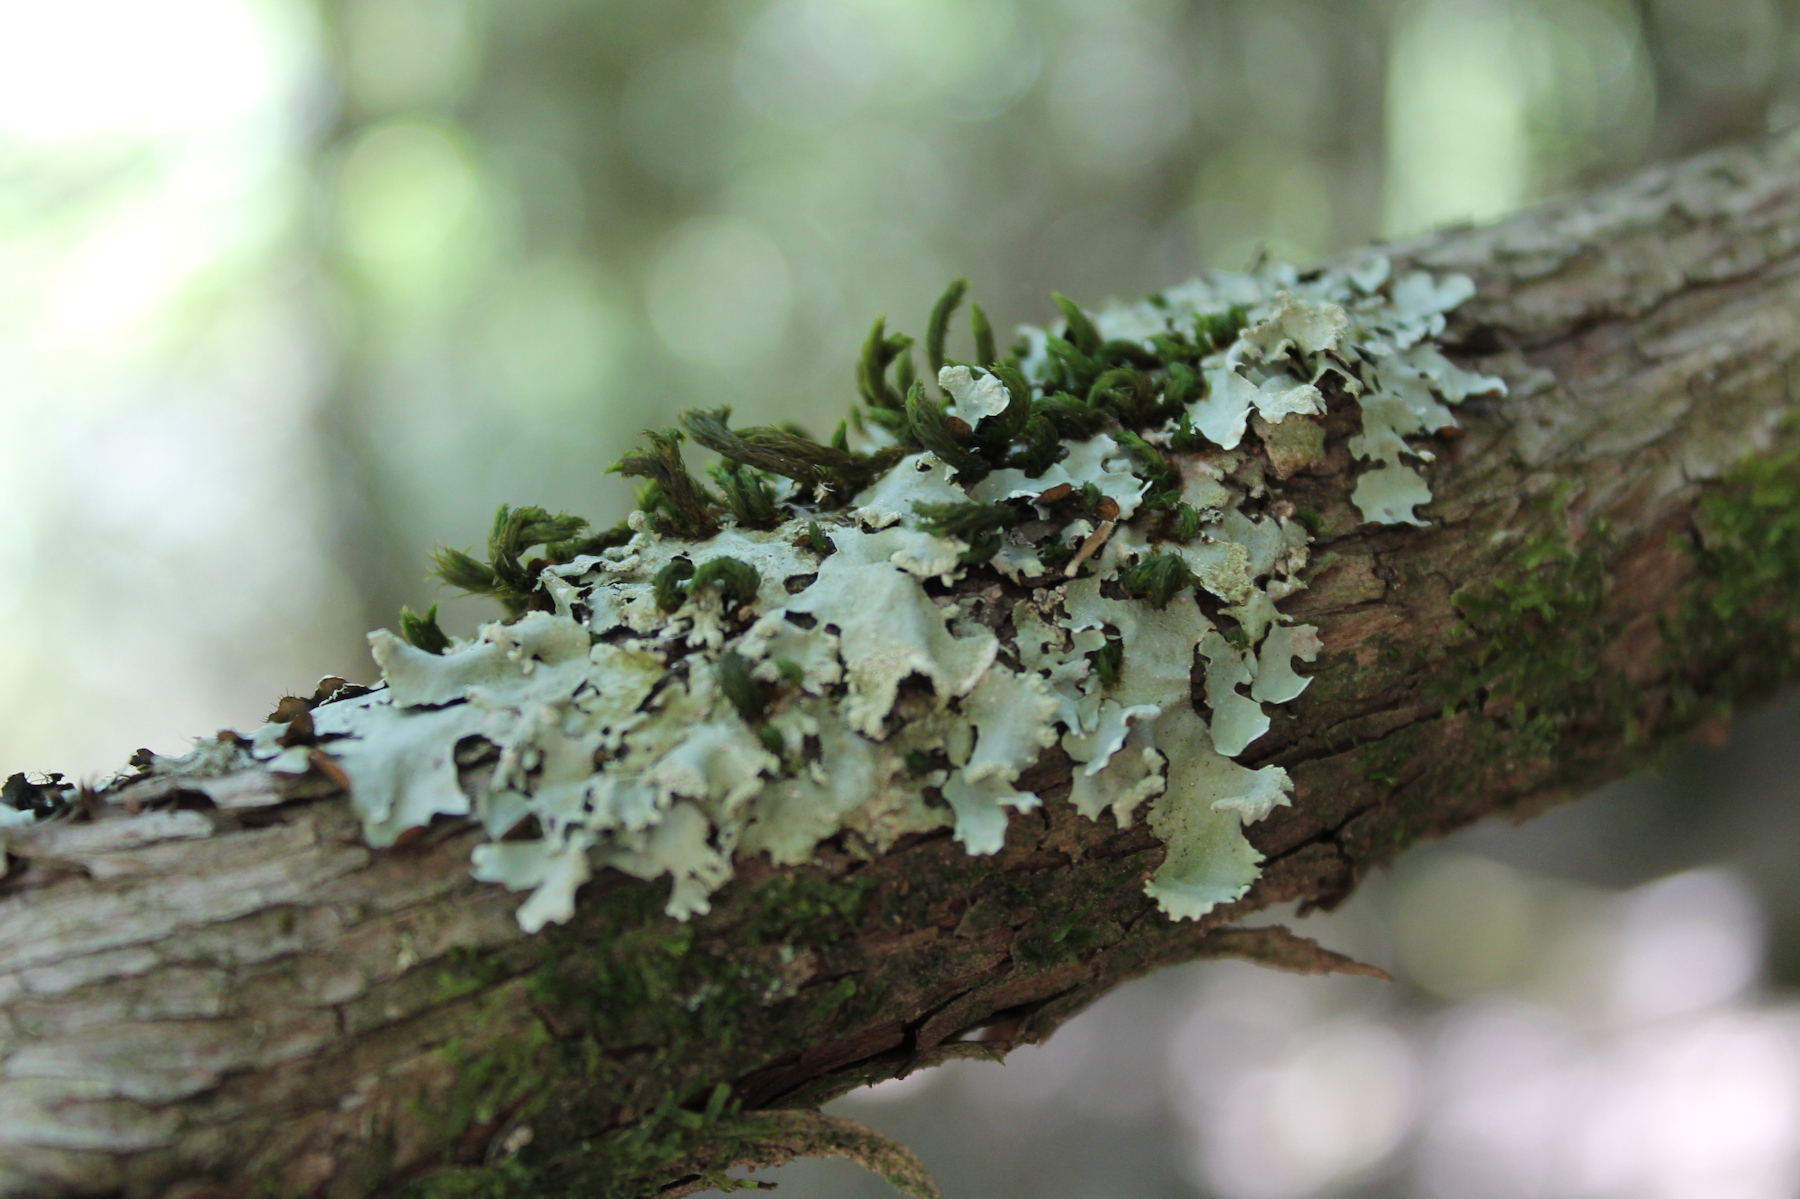 Epiphytic lichen diversity and sustainable forest management: fostering the link between multi-taxon diversity and forest multifunctionality